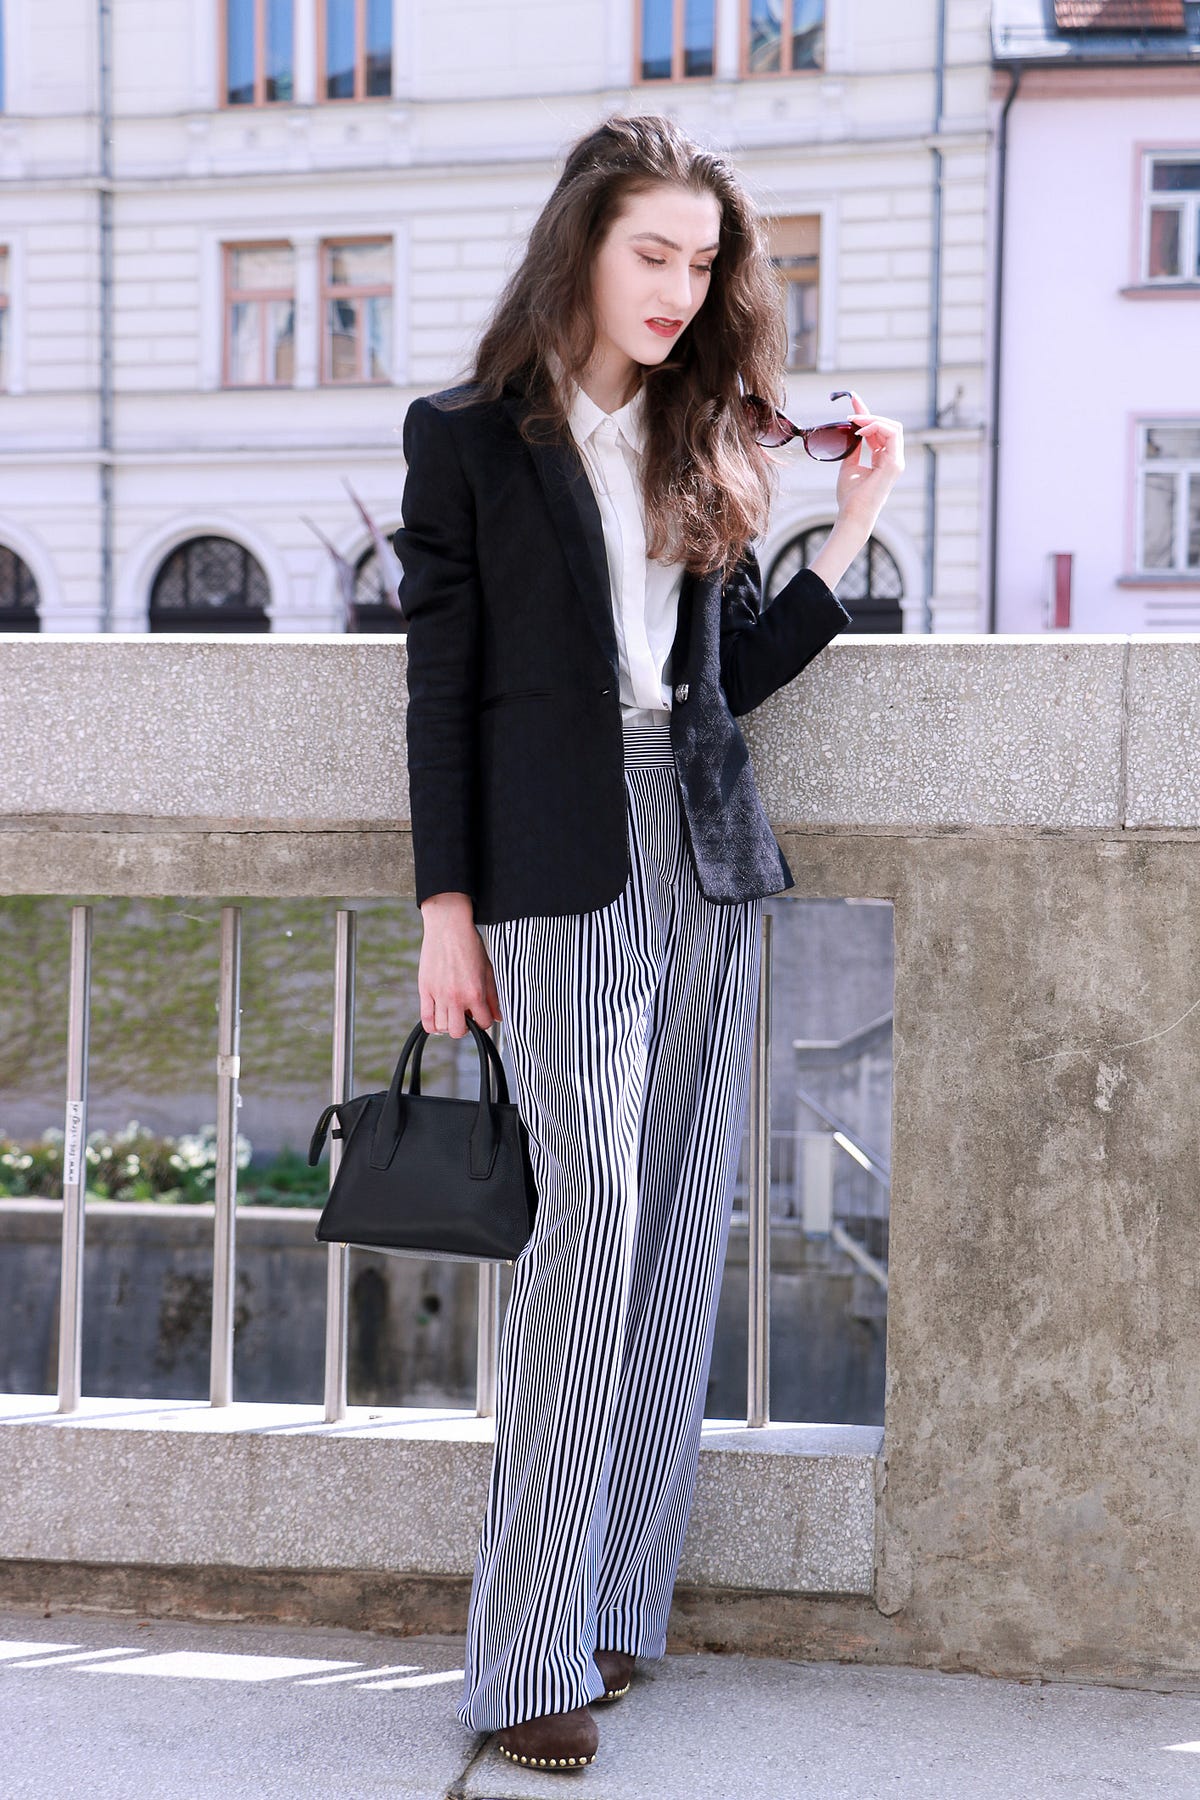 The Relaxed Suit — Striped Wide-leg Pants and a Non-Matchy Blazer